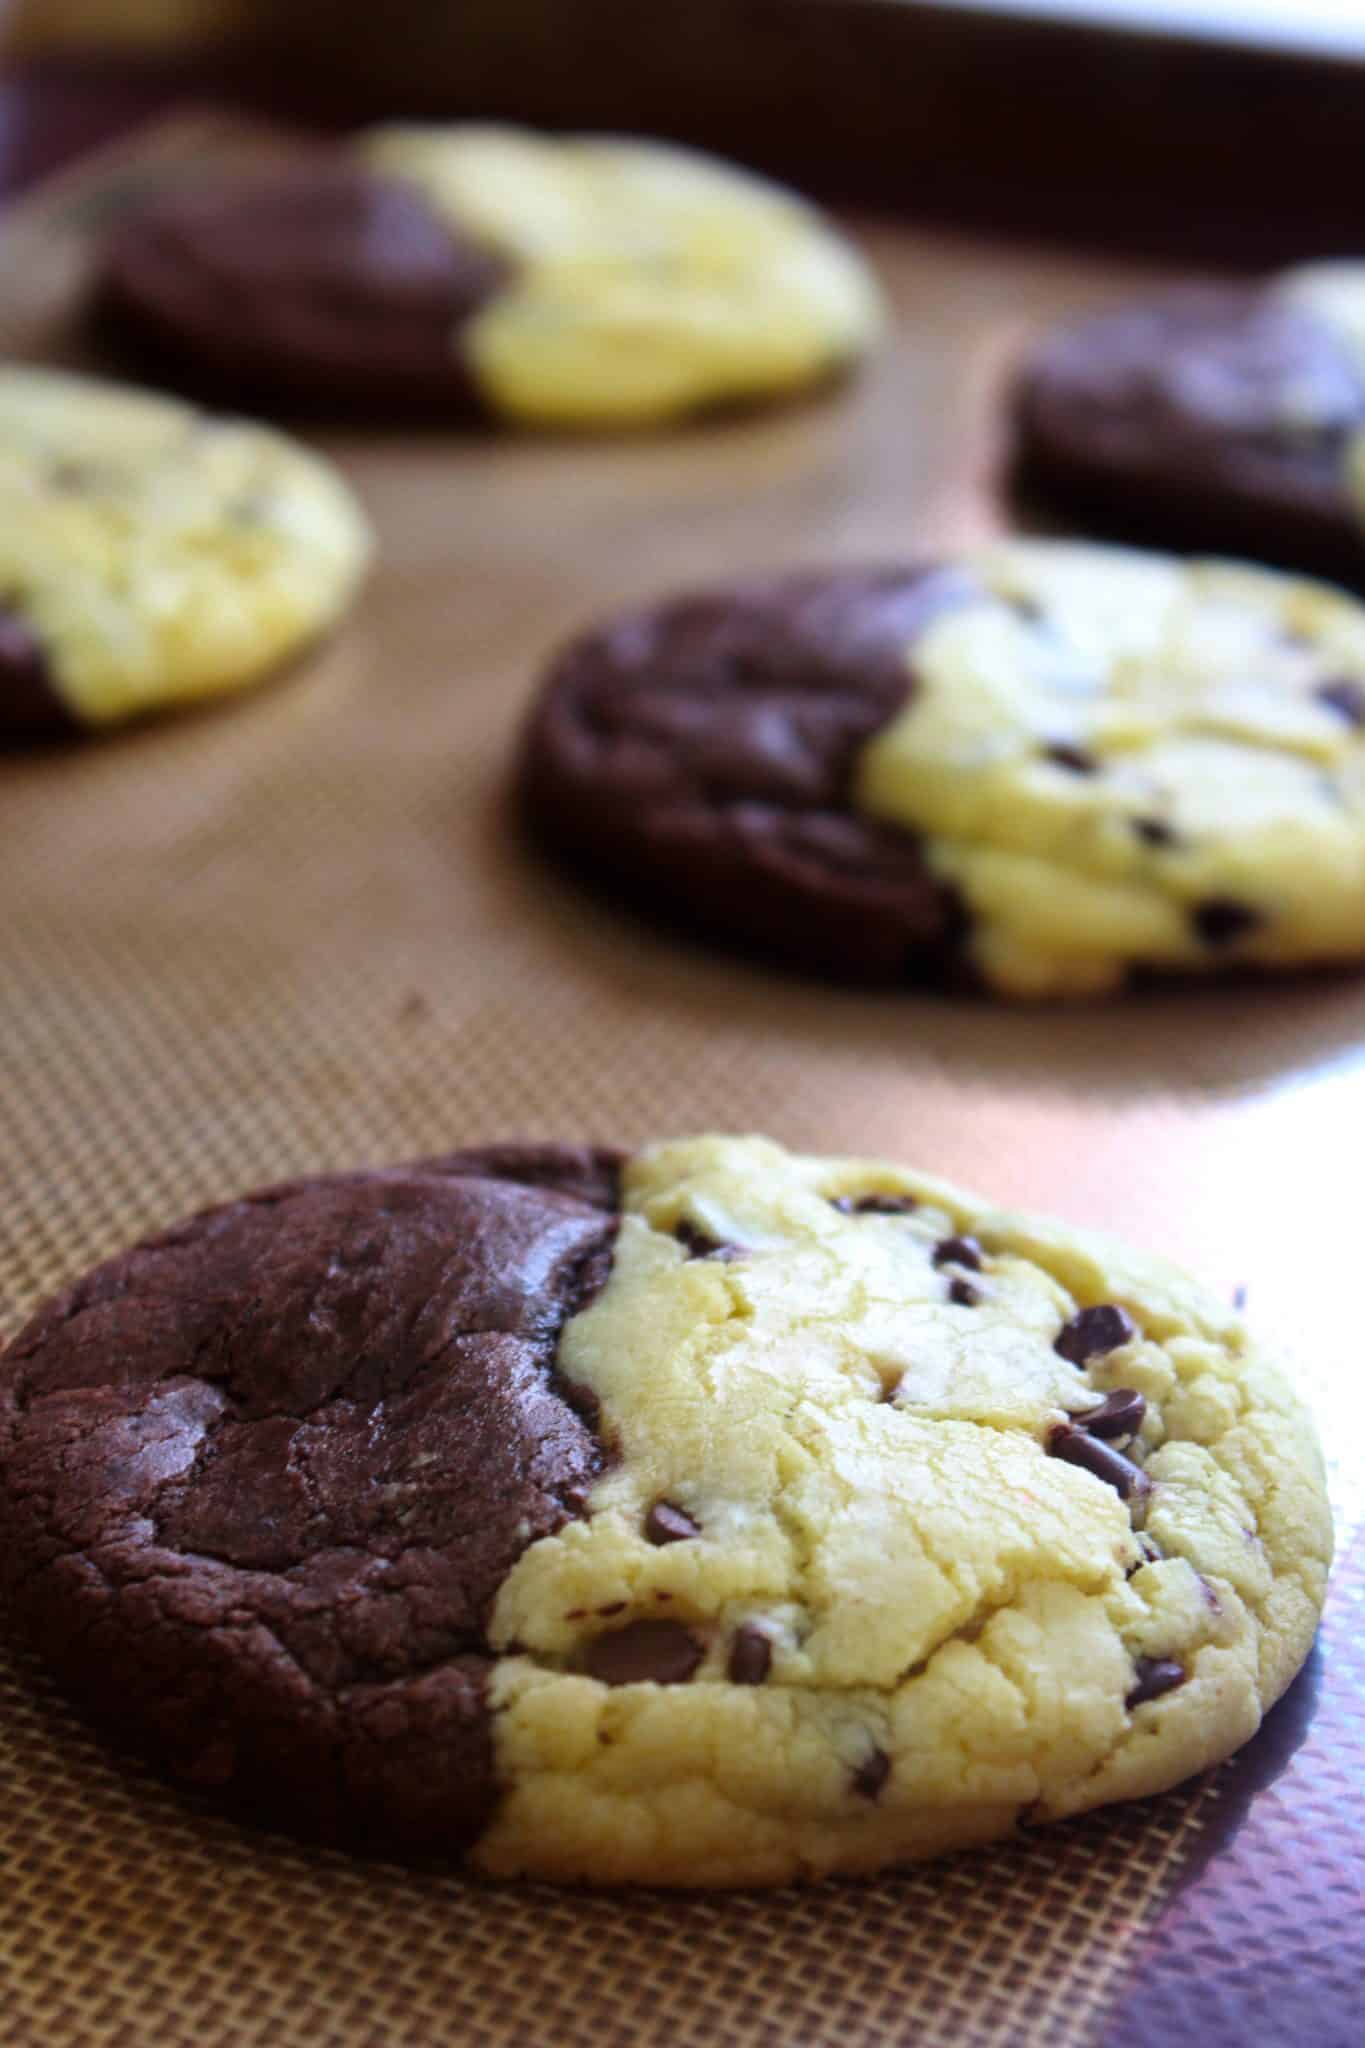 7 tips for making the most delicious cake mix cookies, tips featured by top US food blog, Practically Homemade